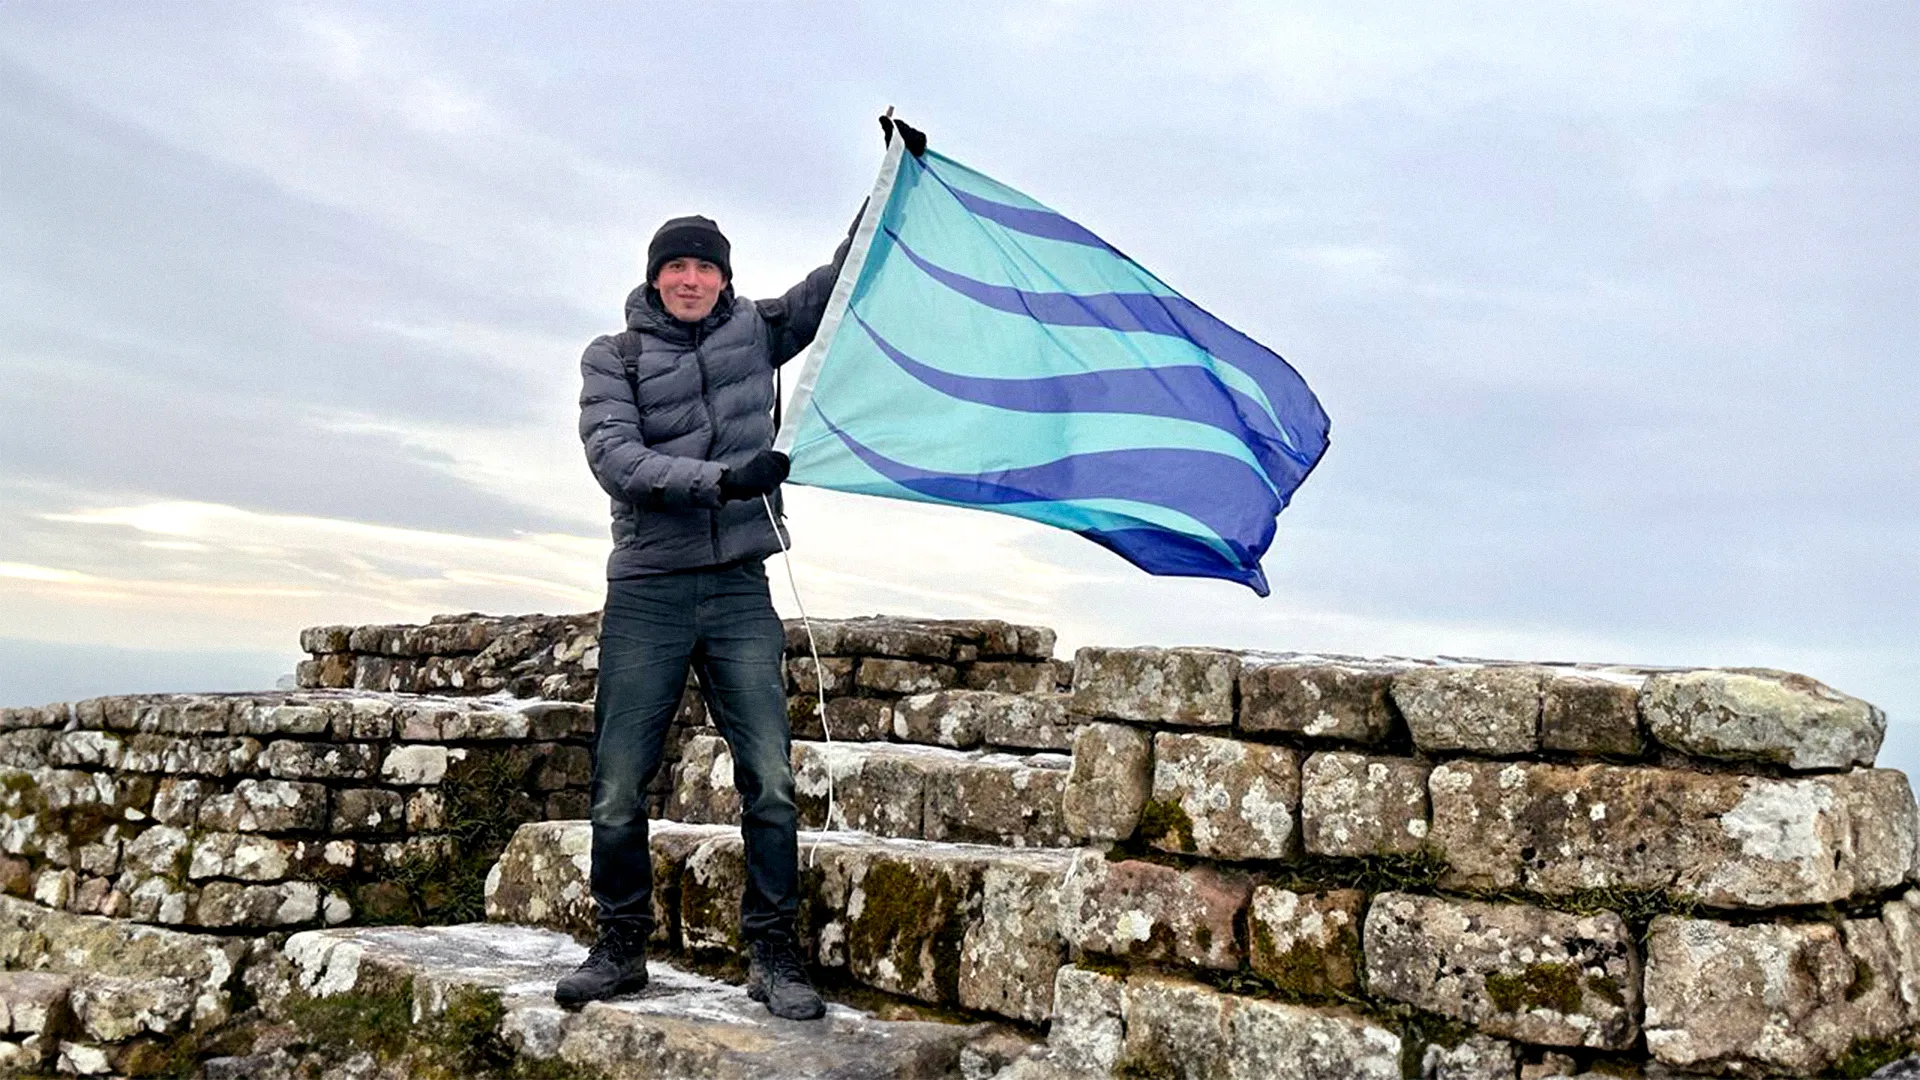 A man wearing a winter coat standing on a ruined wall holding a flag with his two hands. The flag is seagreen and ultramarine blue waves.